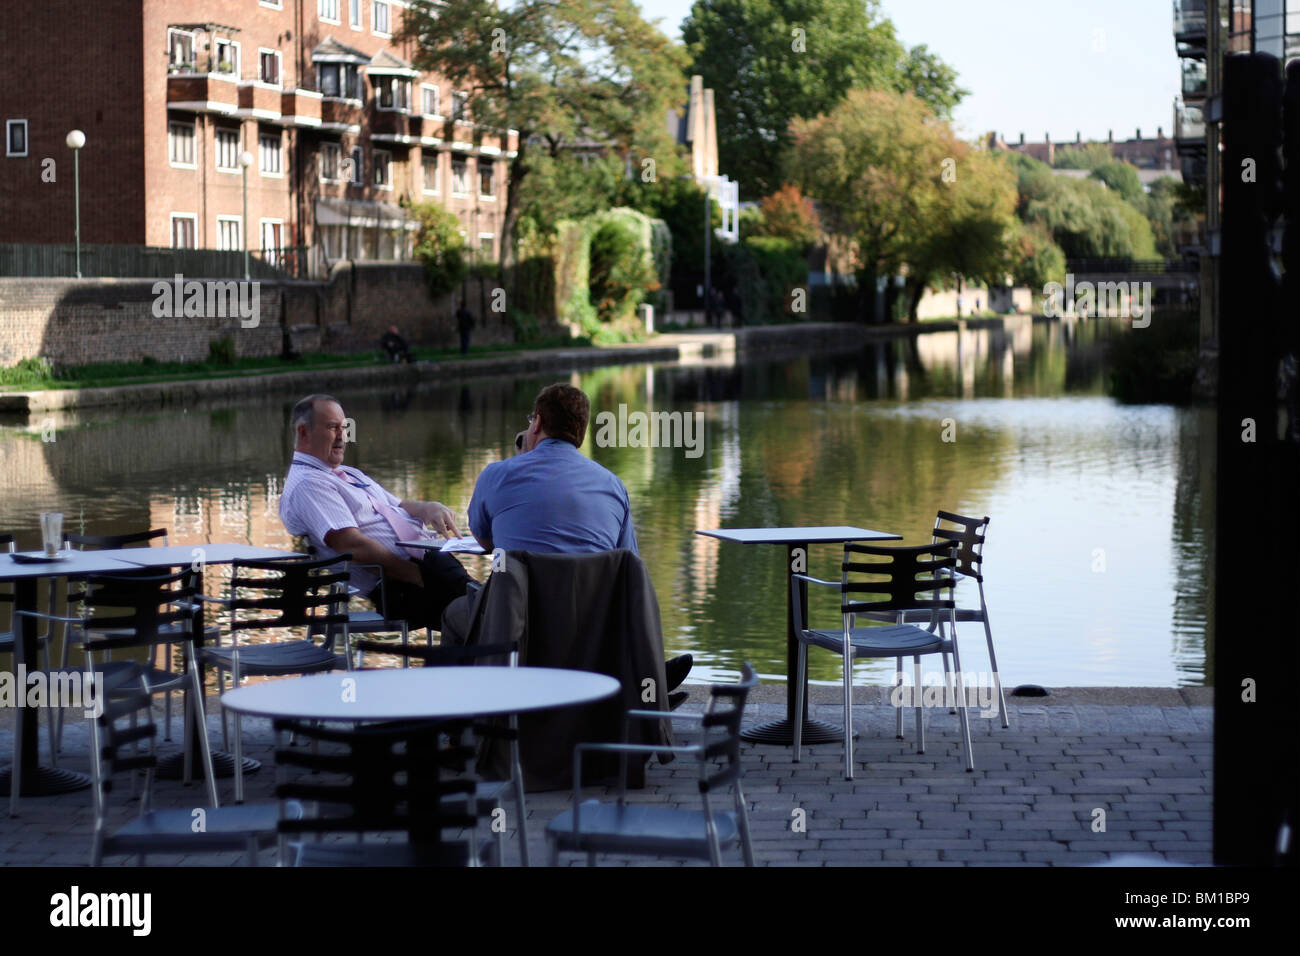 two bussiness men sat having lunch by the river/ canal in london near kings cross and camden. Stock Photo